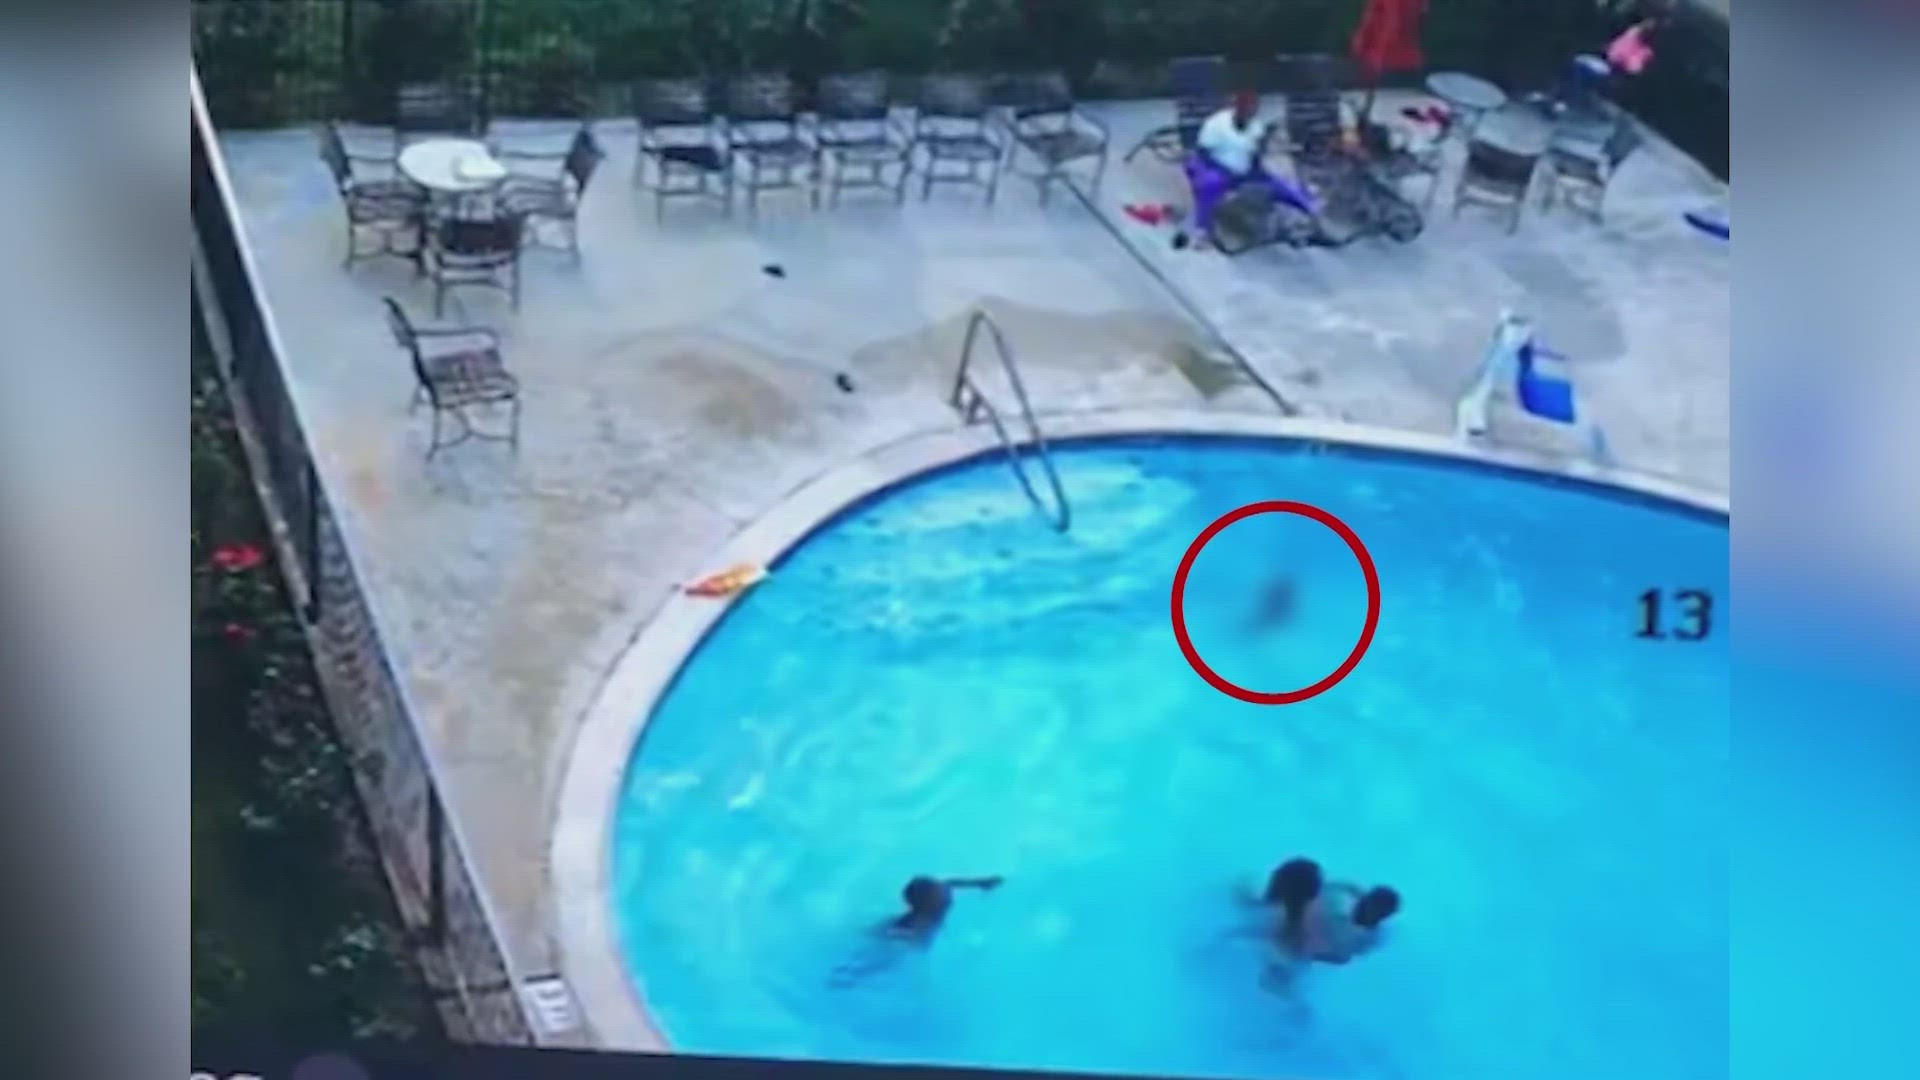 Surveillance video from the motel showed the boy off by himself near the steps and three other children playing in the pool nearby.